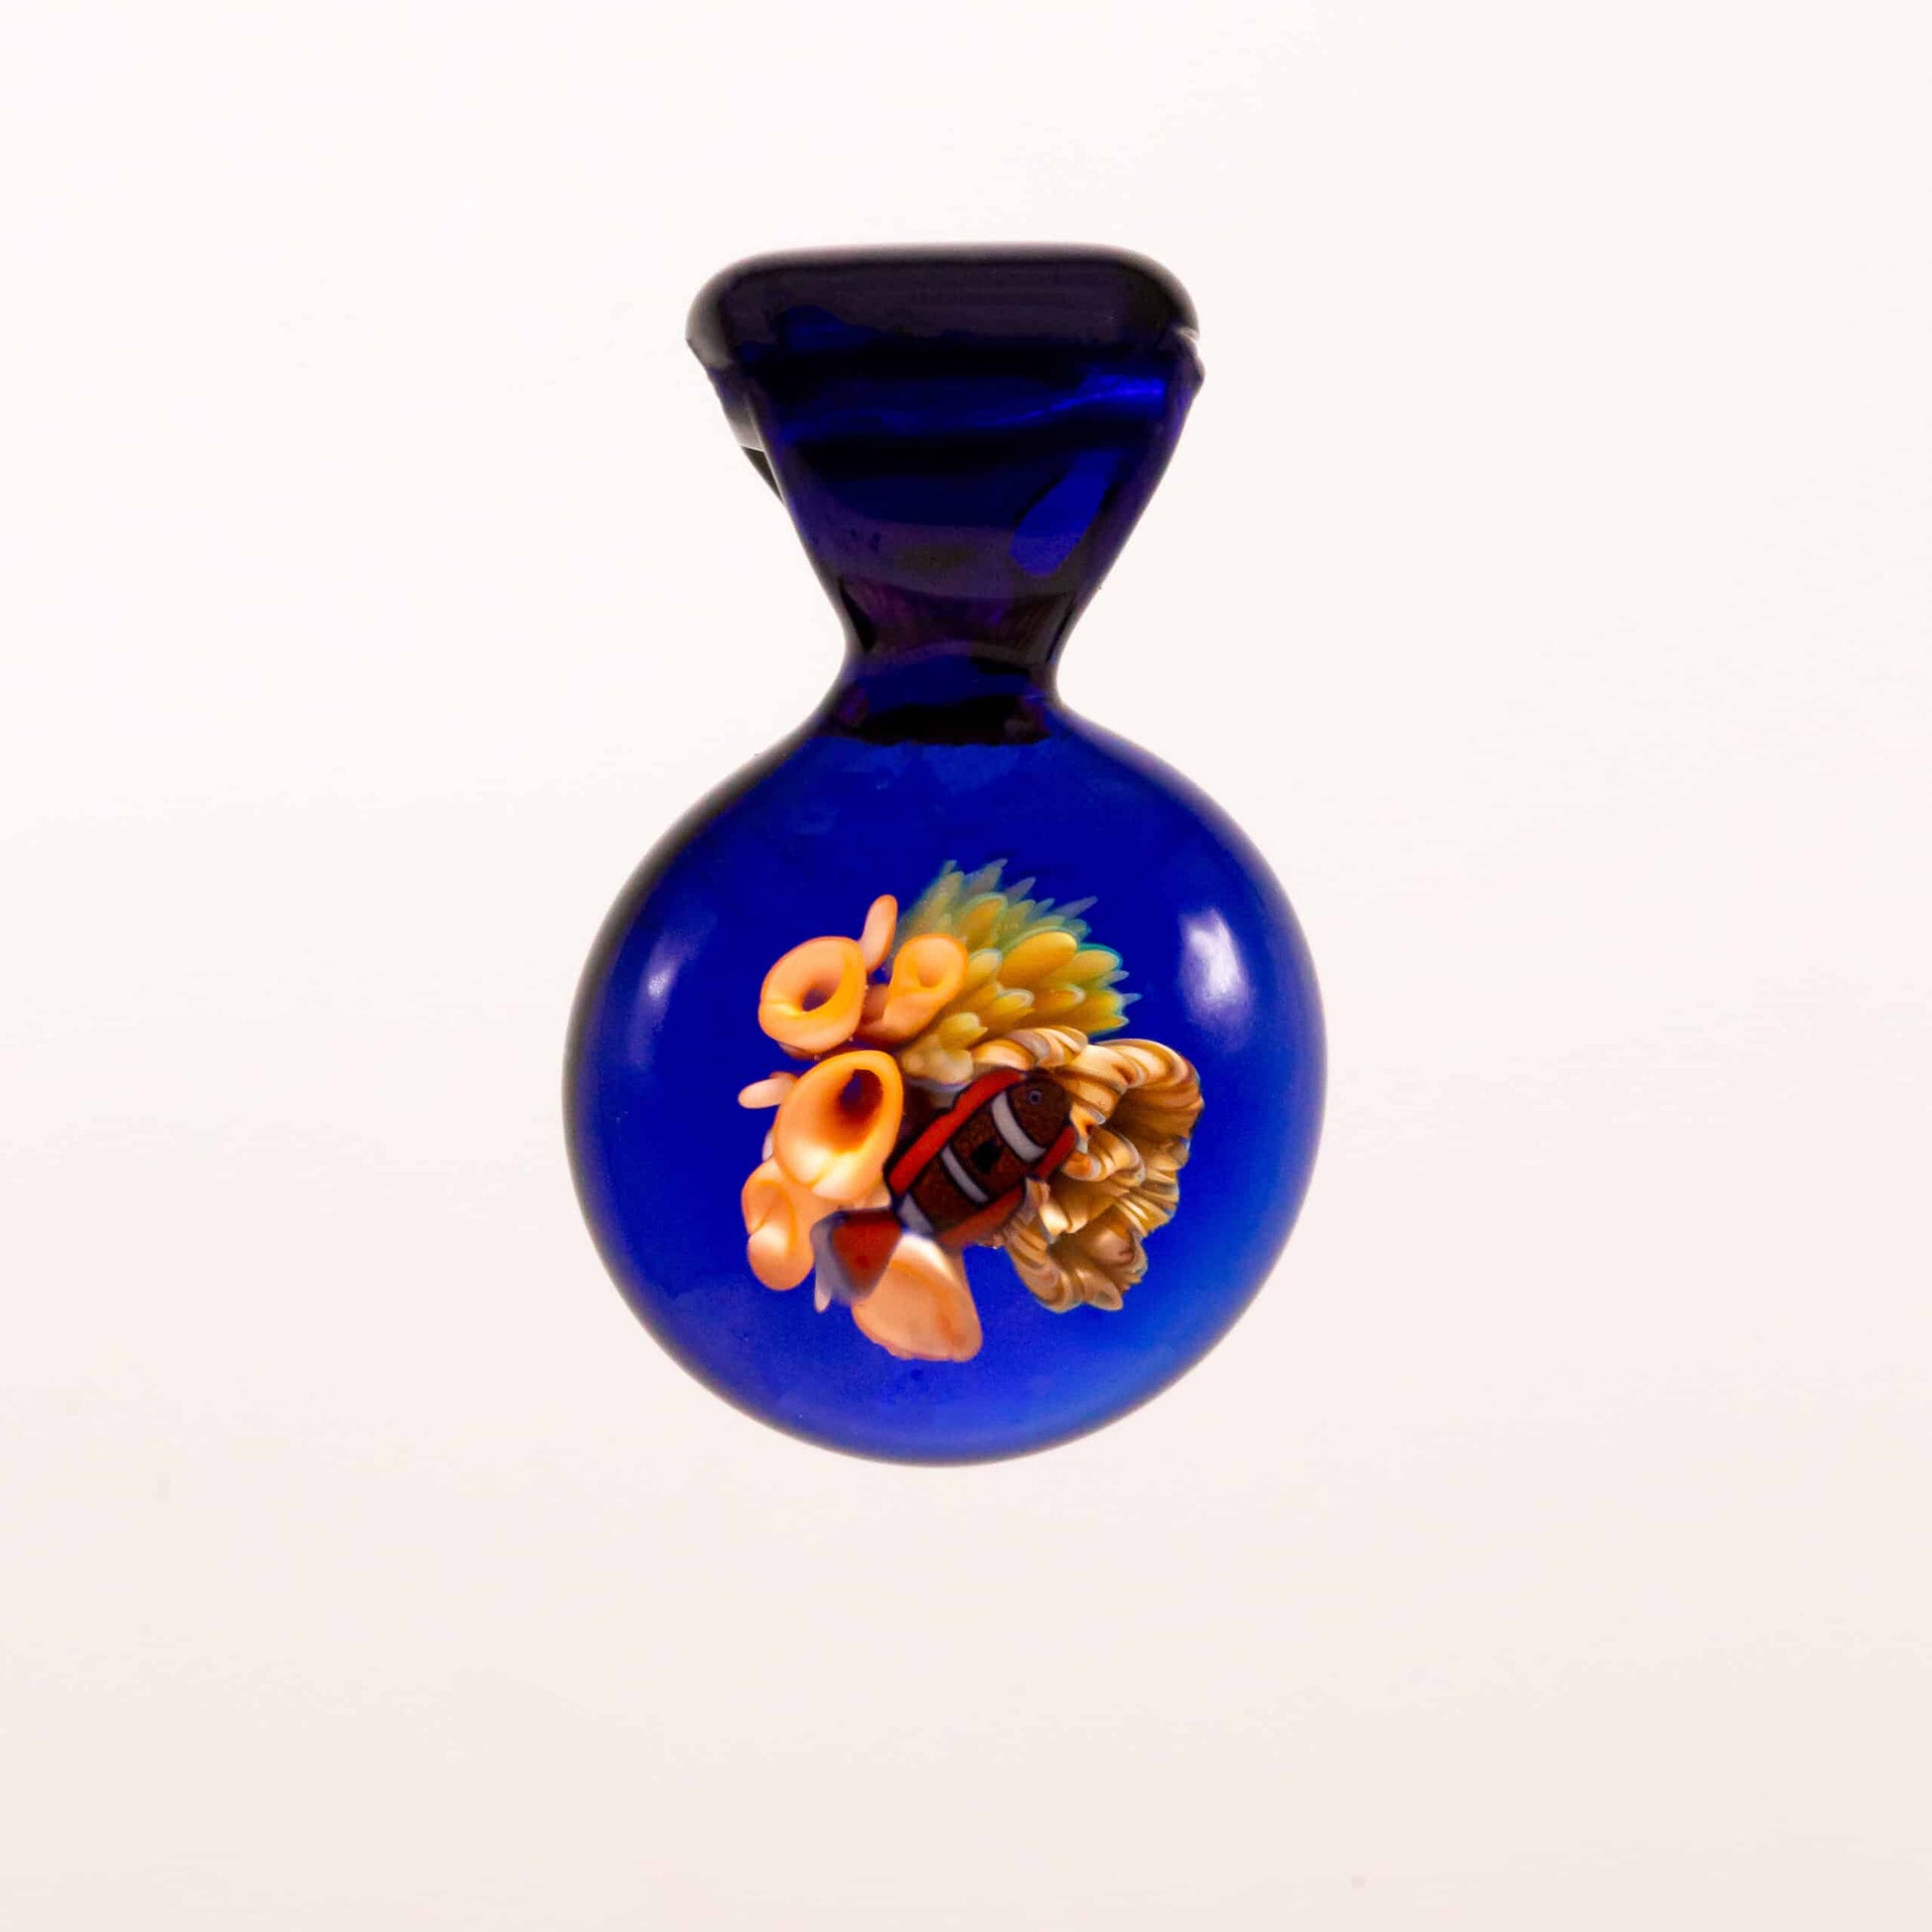 hand-blown glass pendant - Coral Reef Pendant (BLUE, CLOWNFISH) #1 BY KIMMO